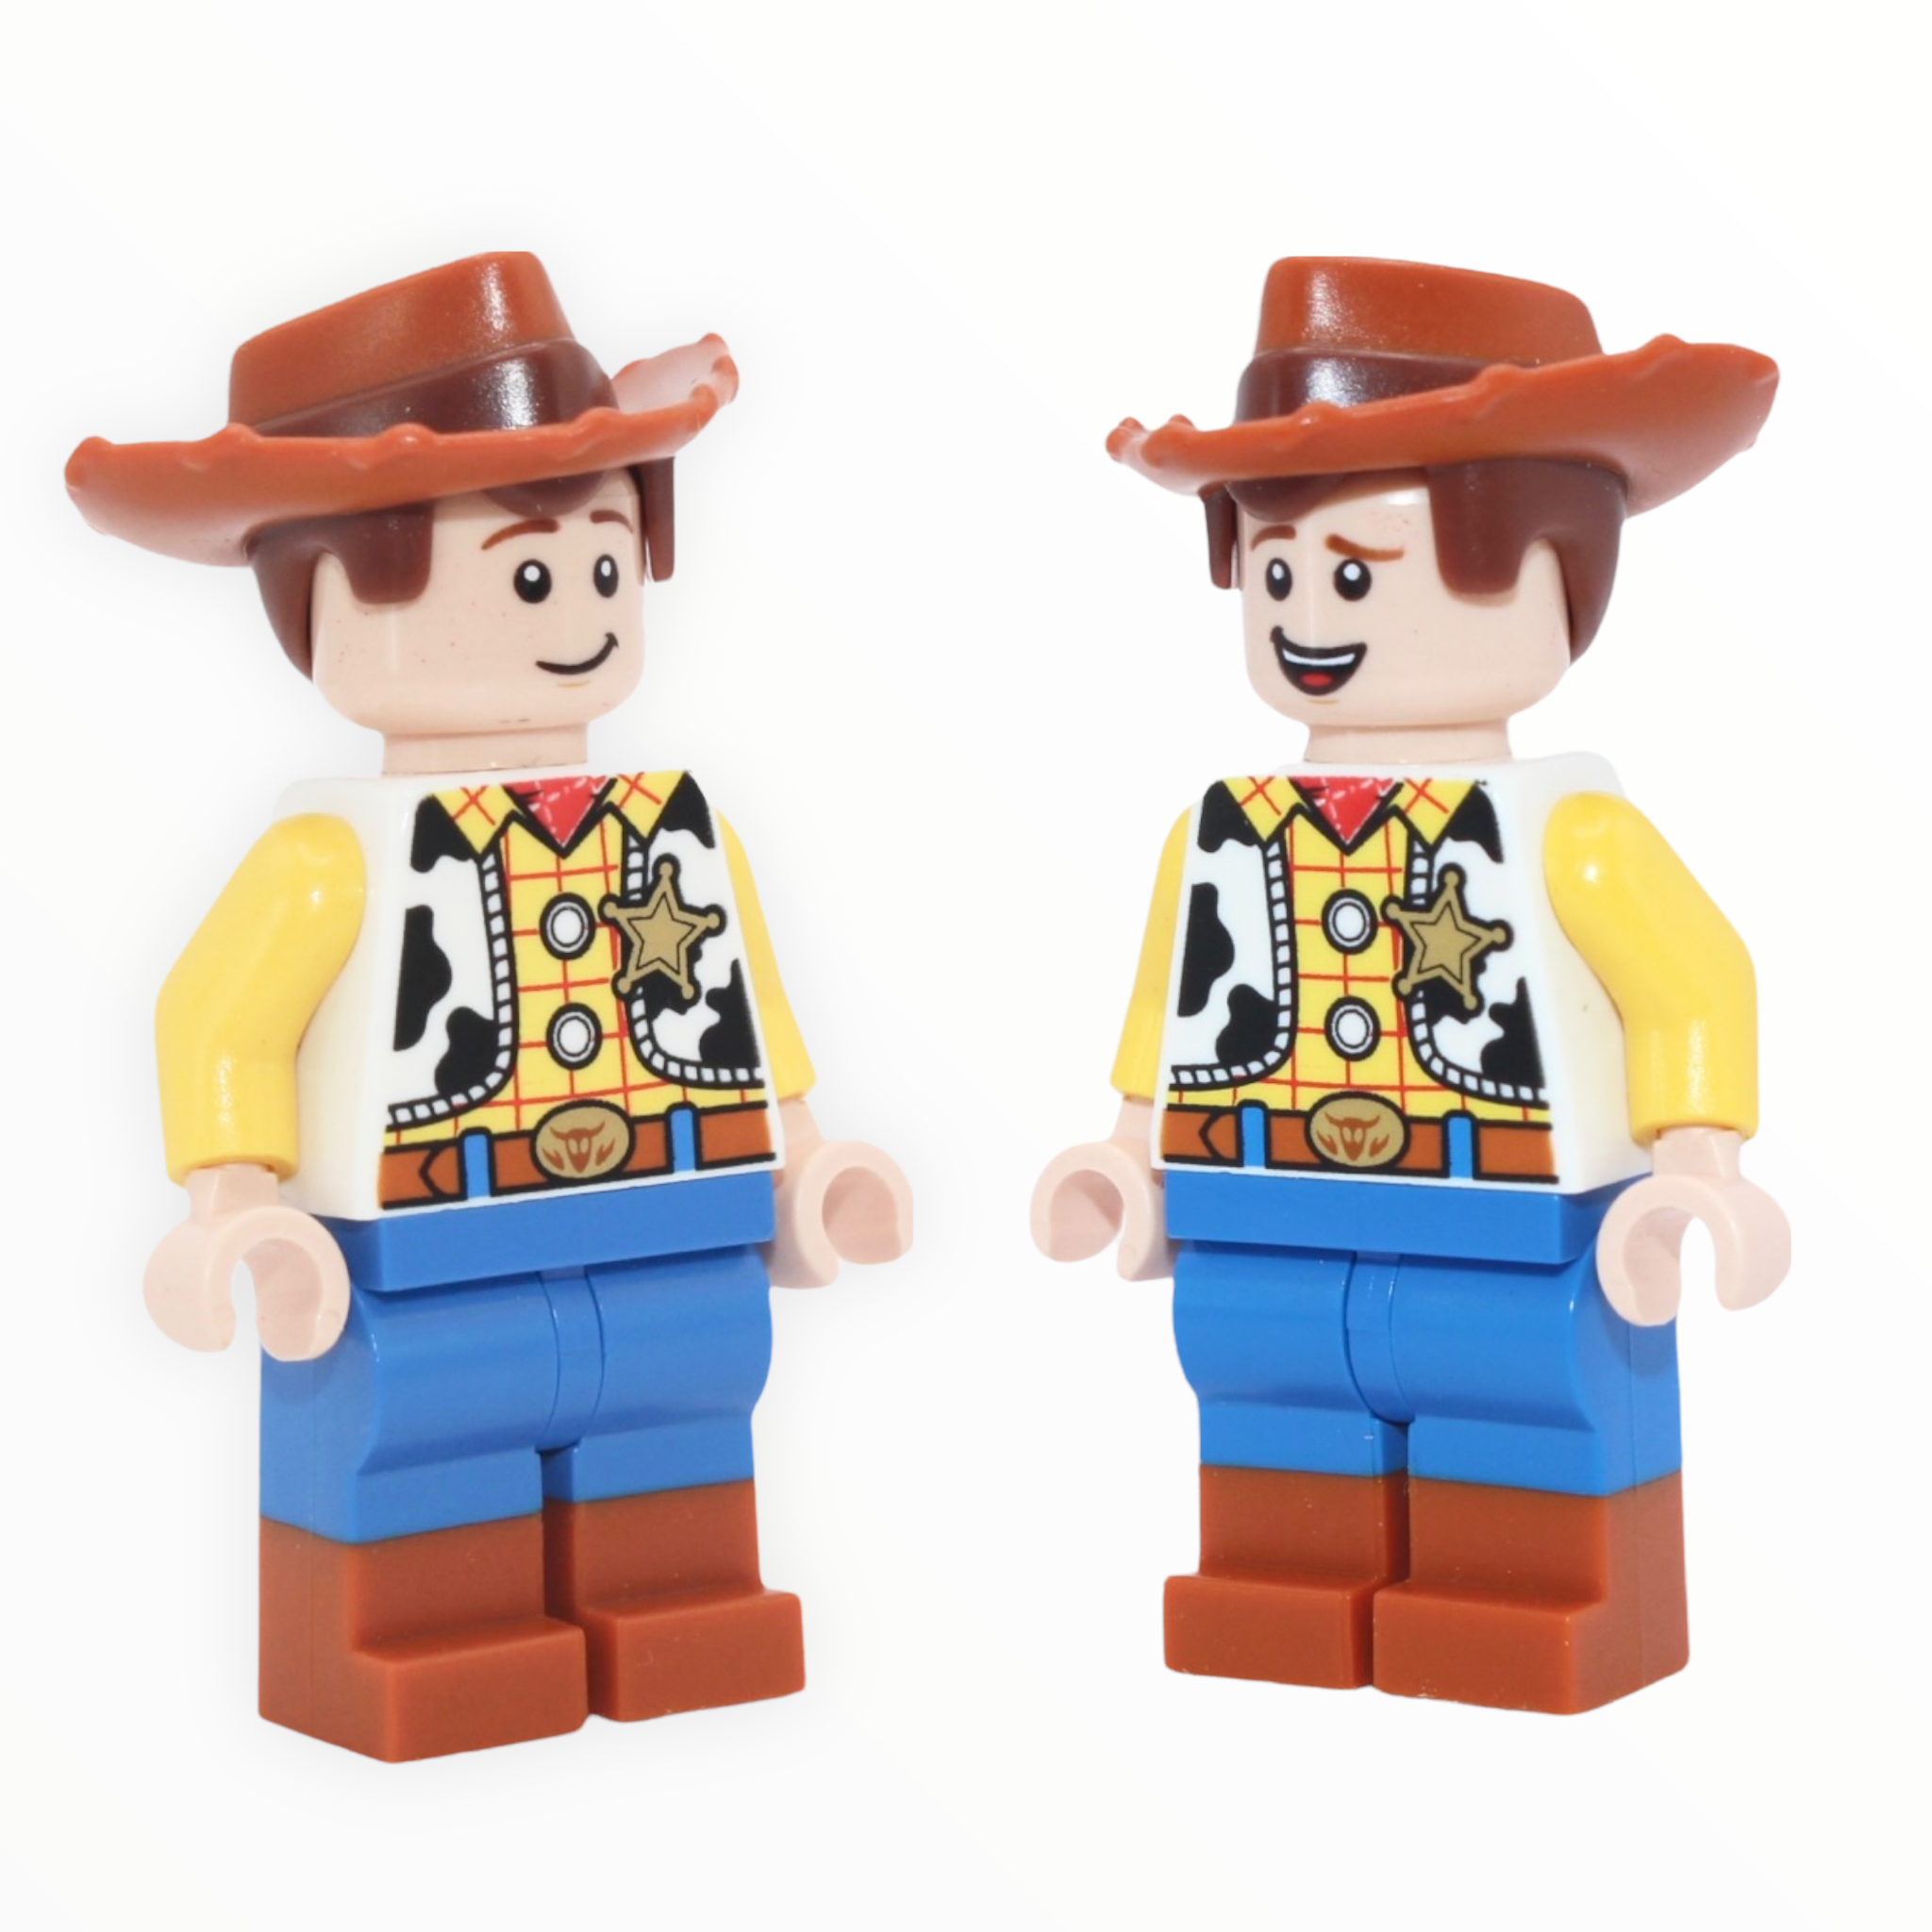 Woody (Toy Story 4, open mouth smile)